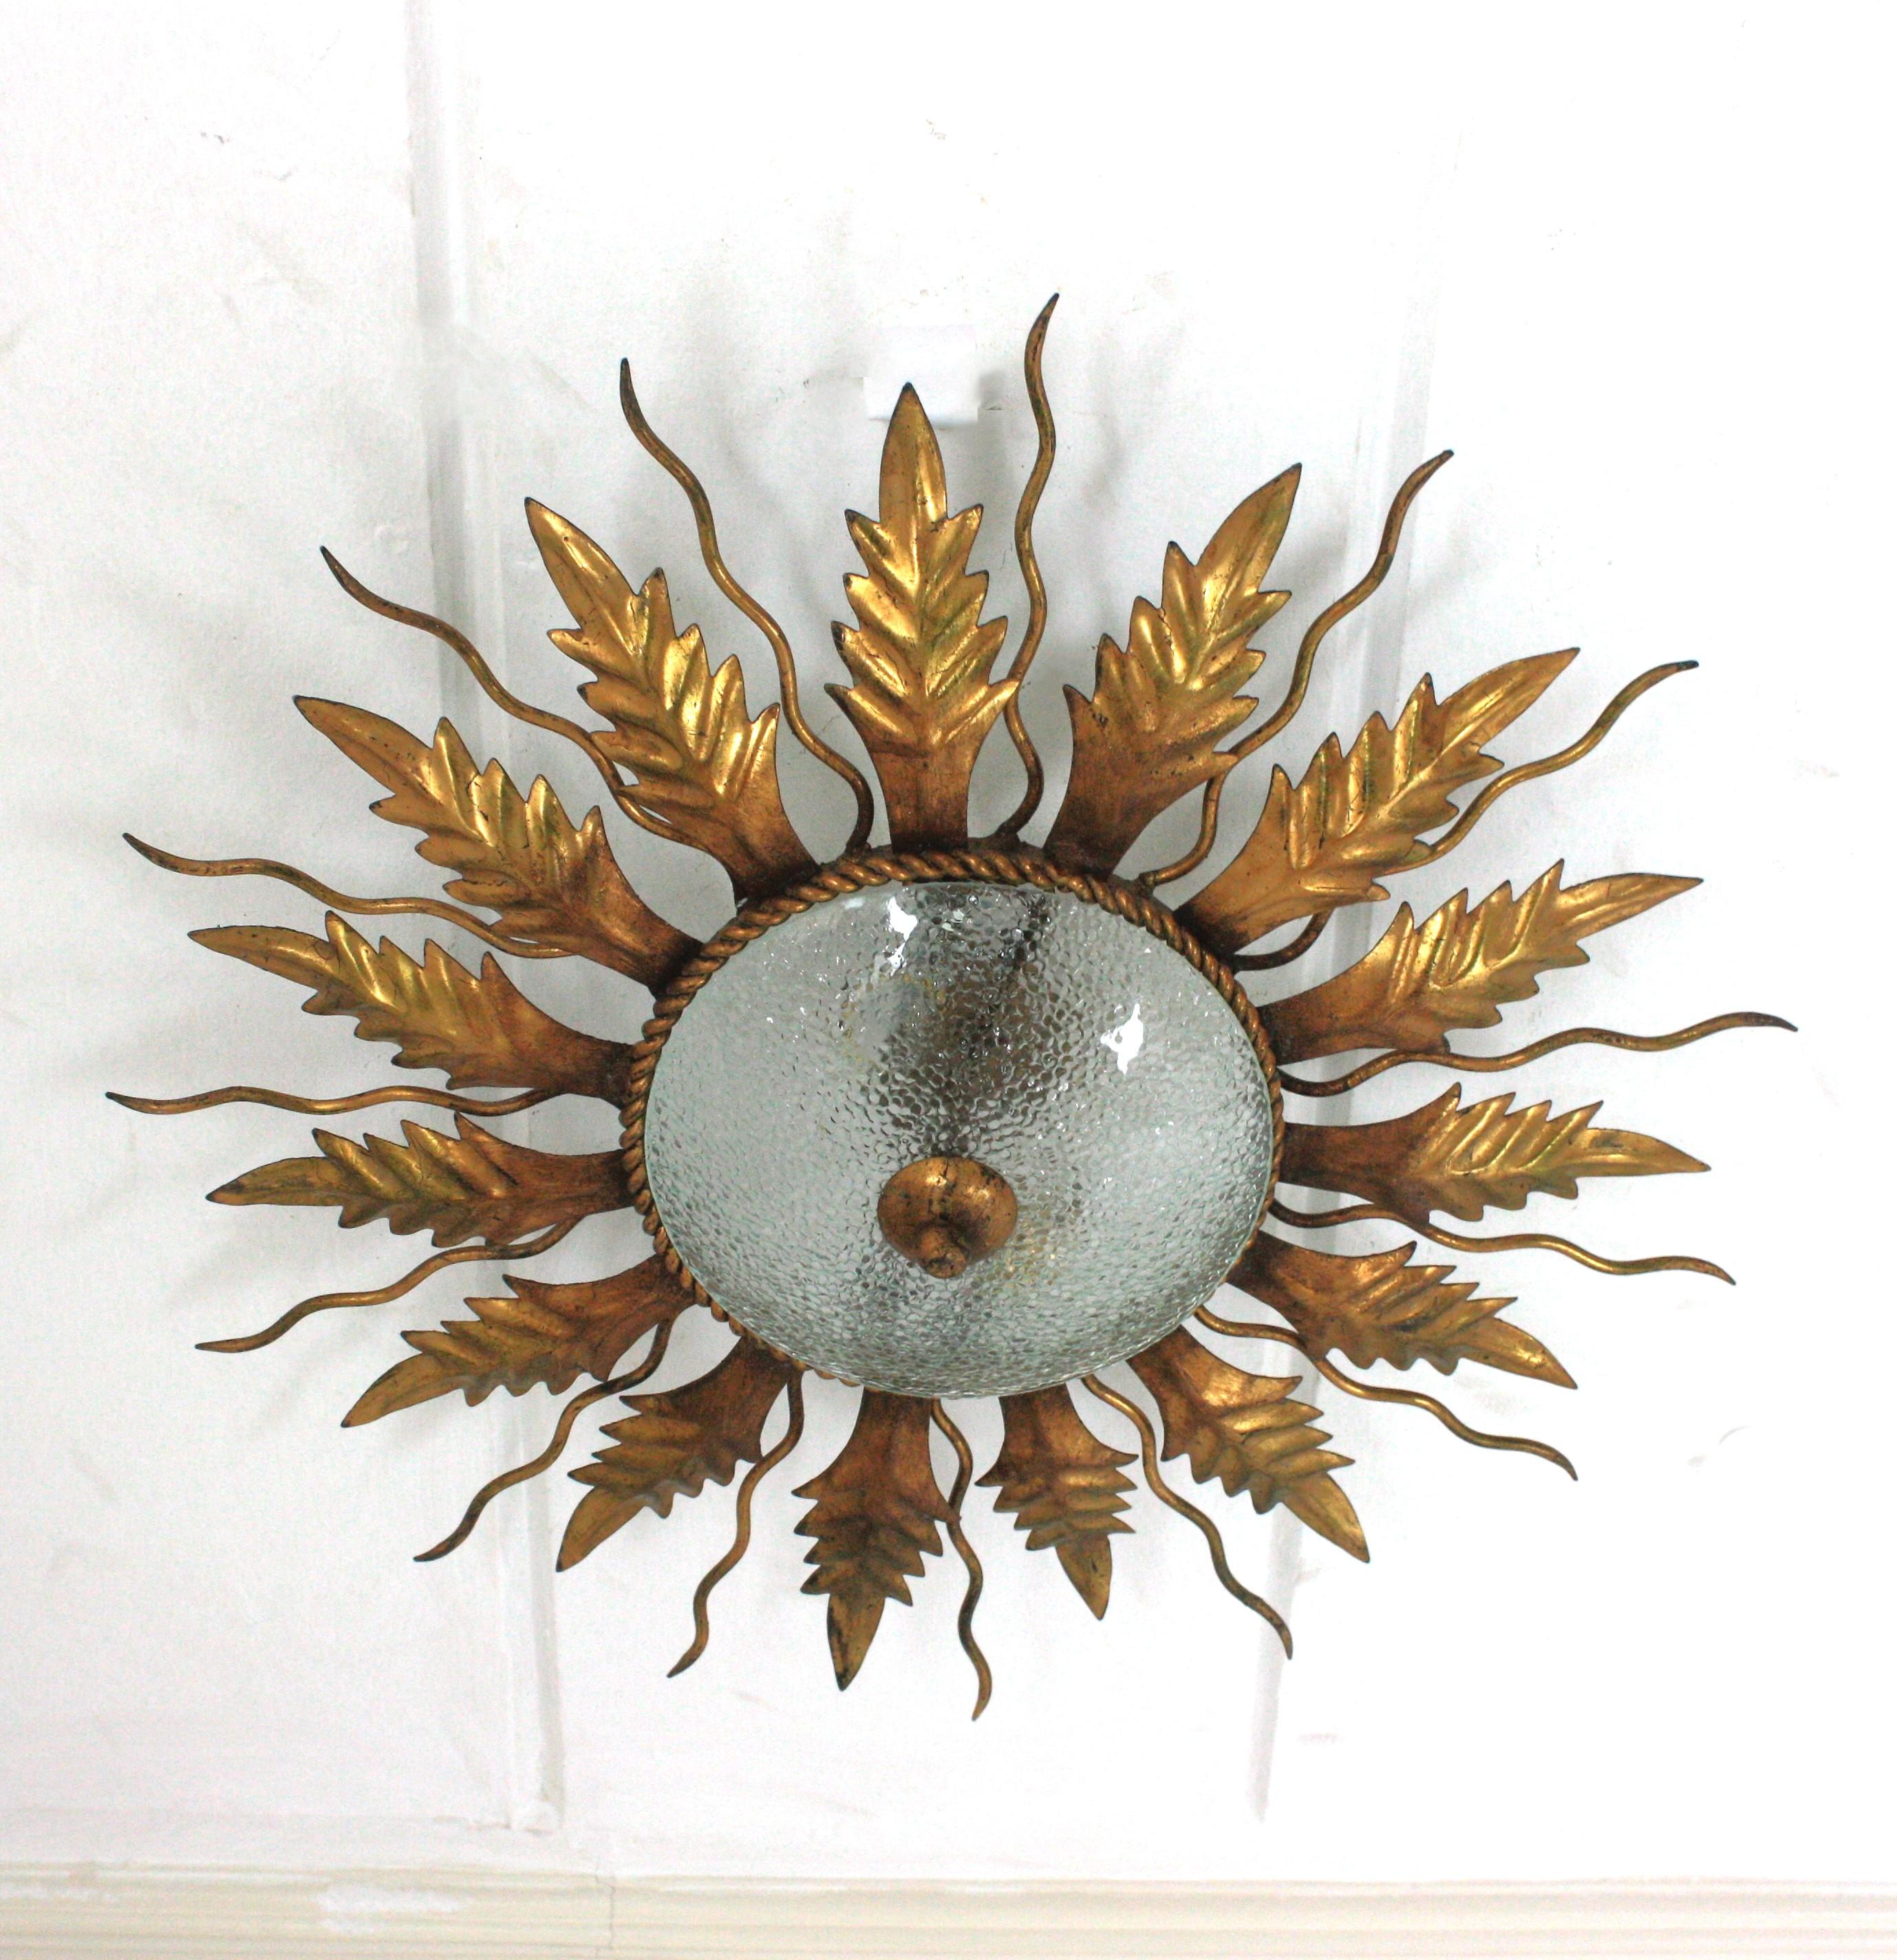 Forged Sunburst Light Fixture / Flush Mount in Gilt Wrought Iron and Cracked Glass For Sale